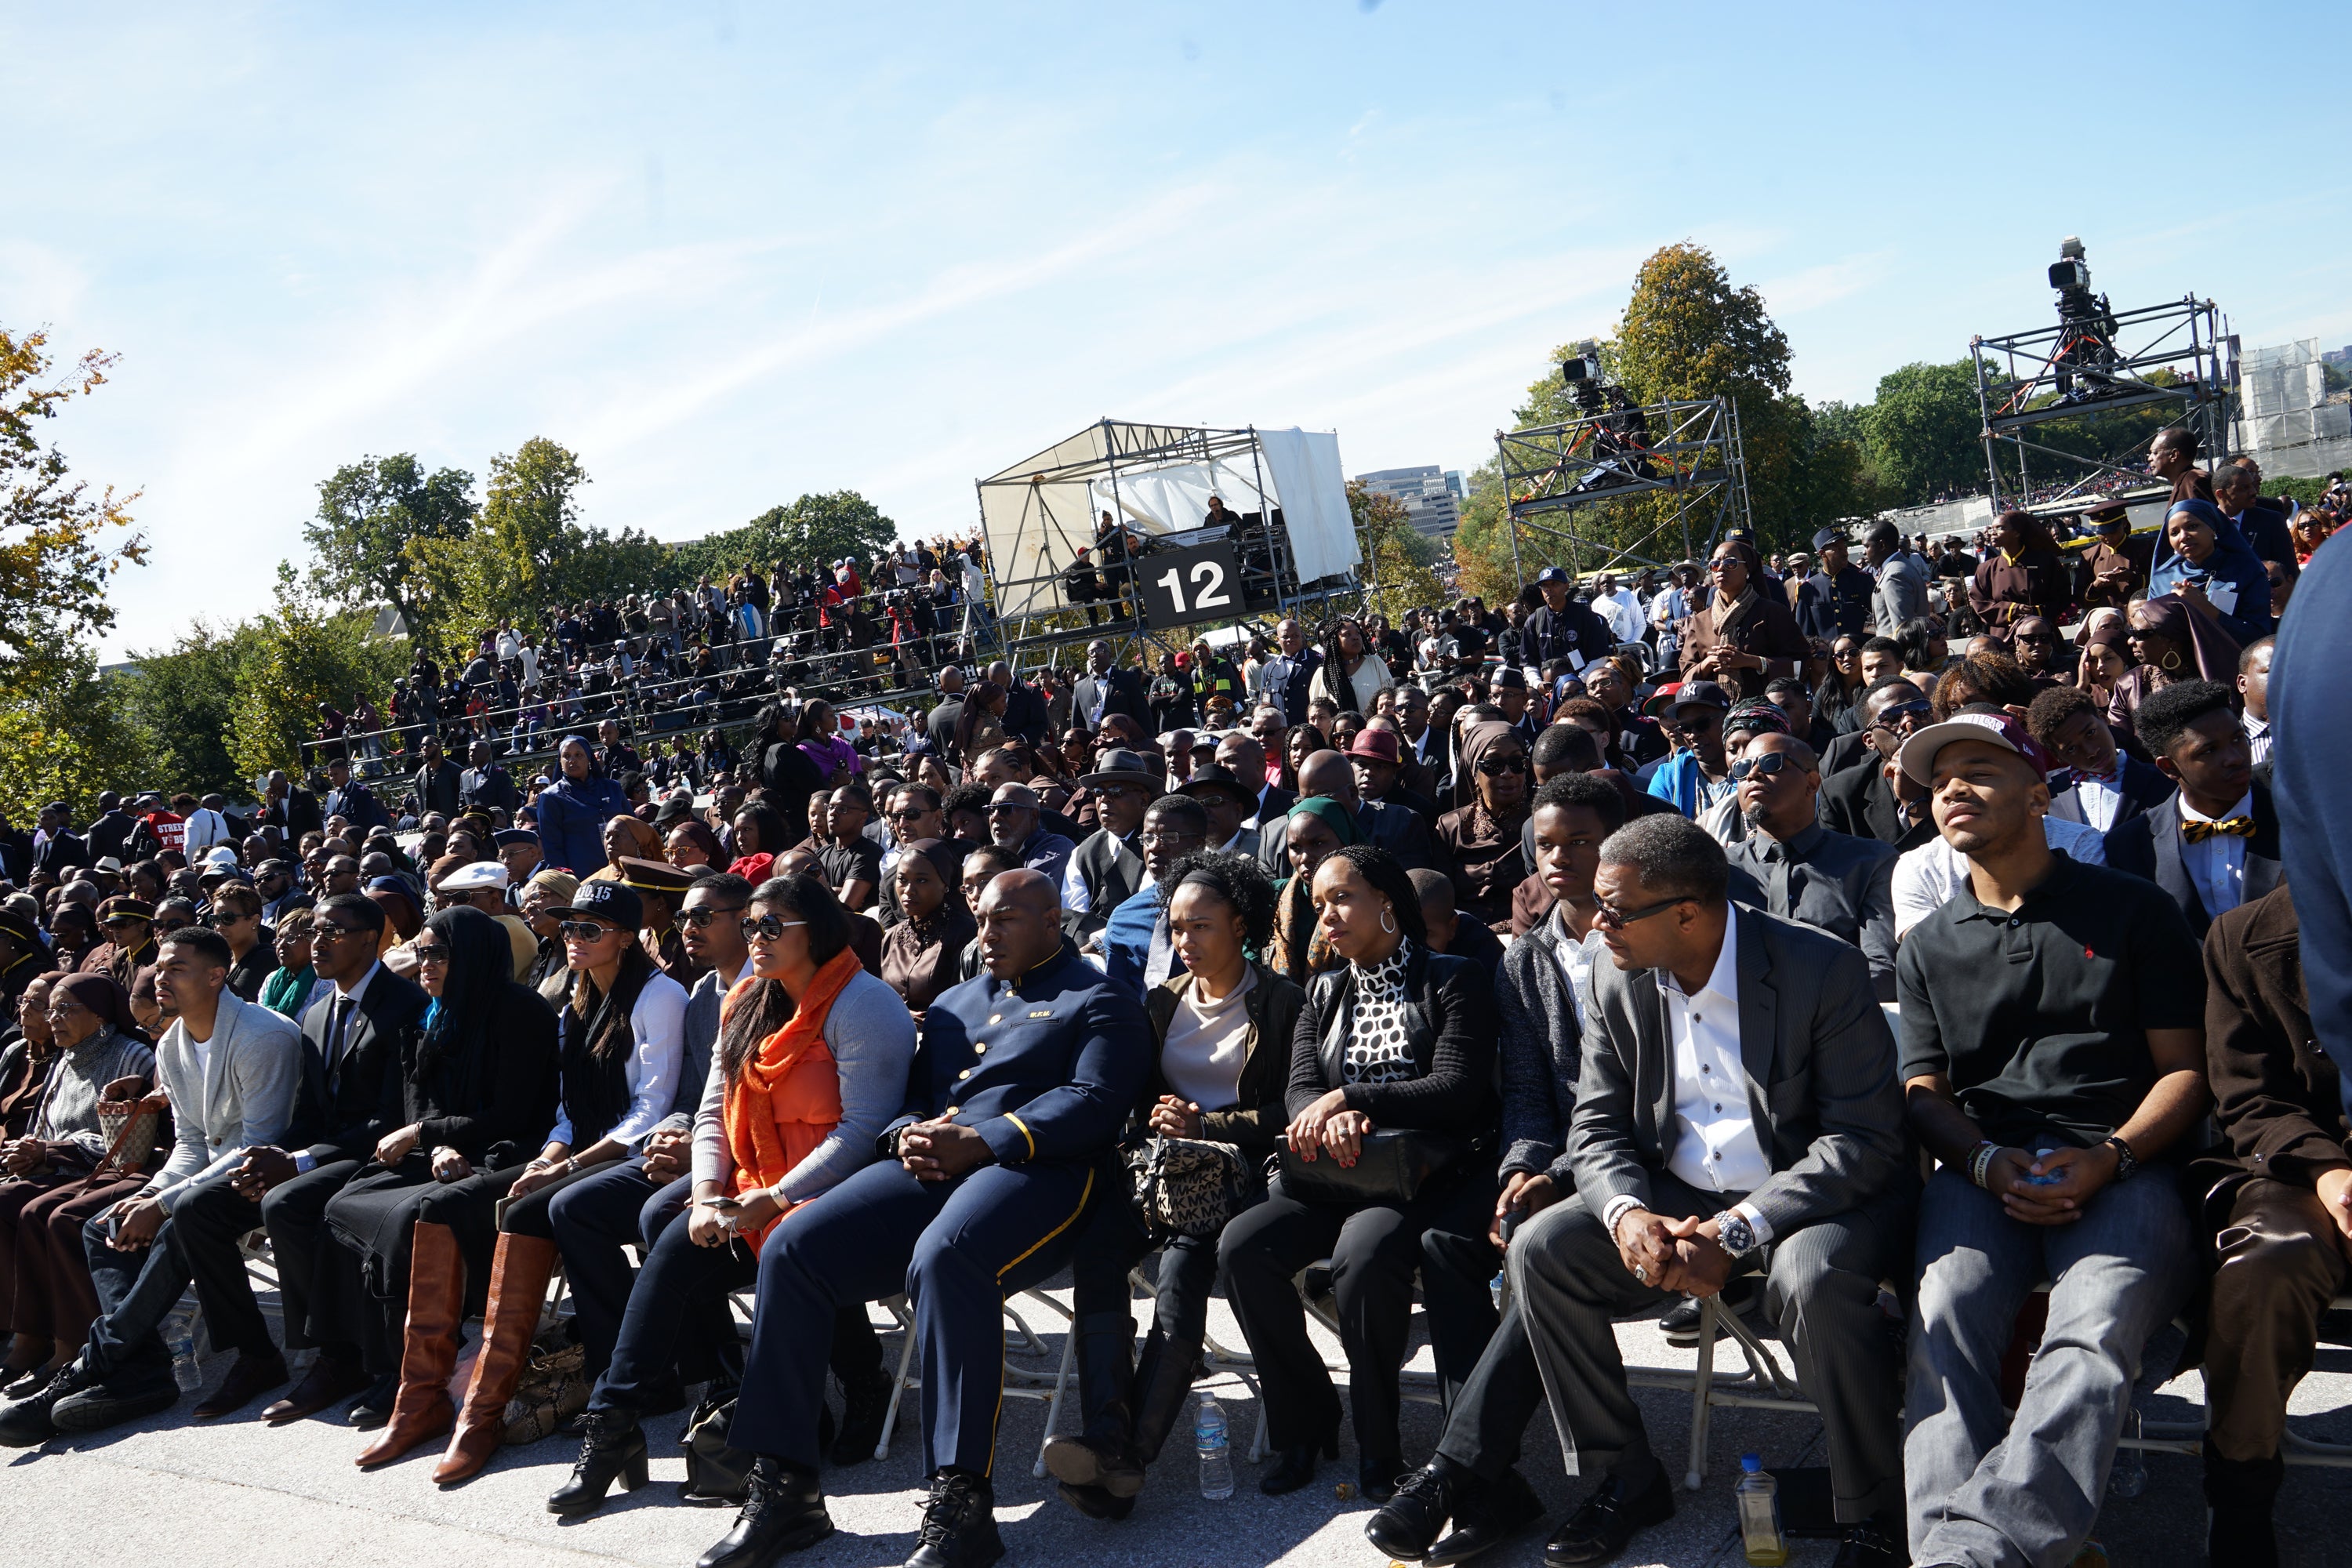 PHOTOS: Relive the 'Justice Or Else!' Rally on 20th Anniversary of Million Man March